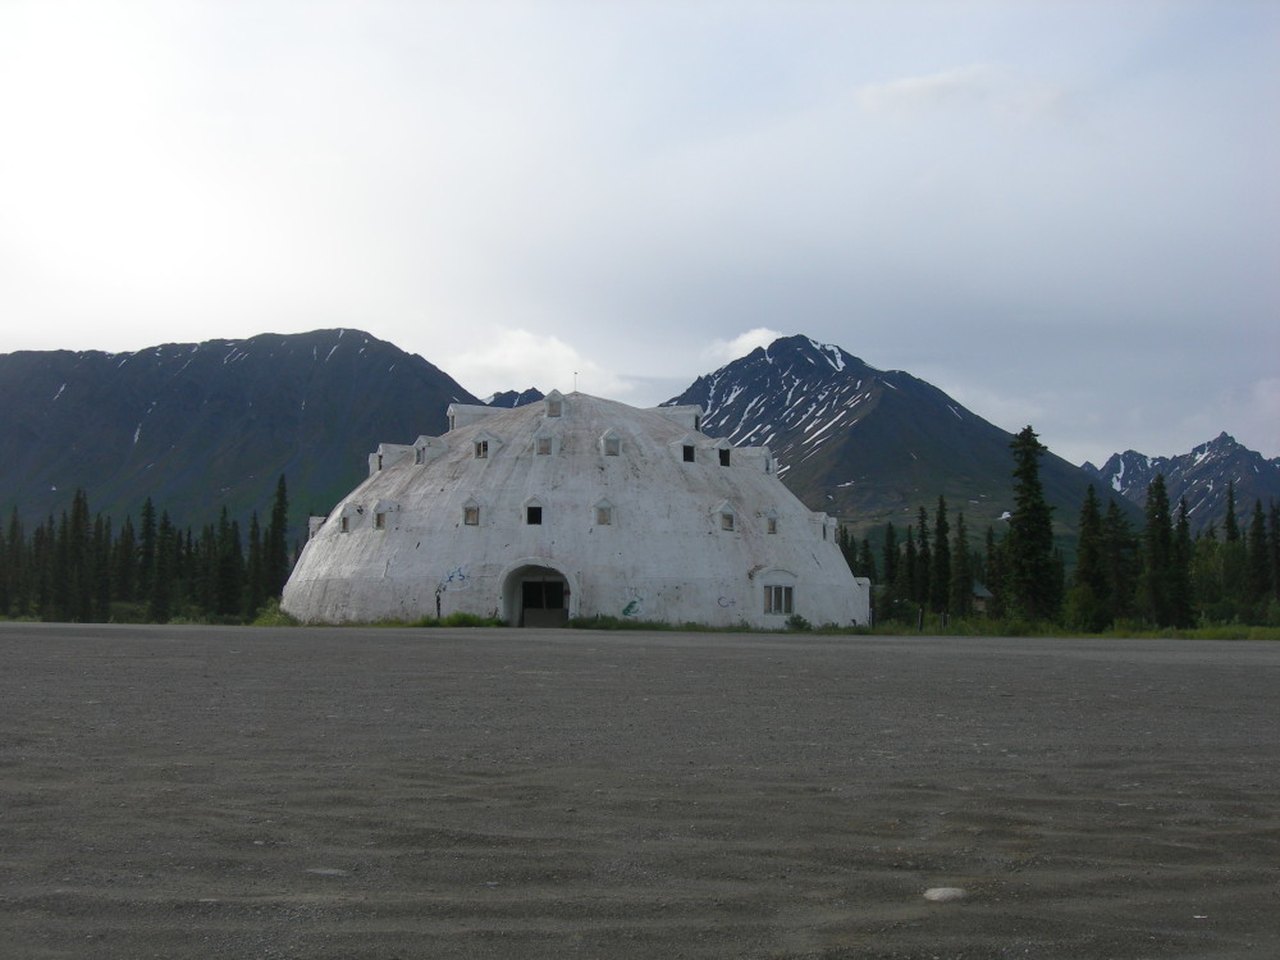 This Eerie Abandoned Igloo Hotel In Alaska Is Oddly Fascinating